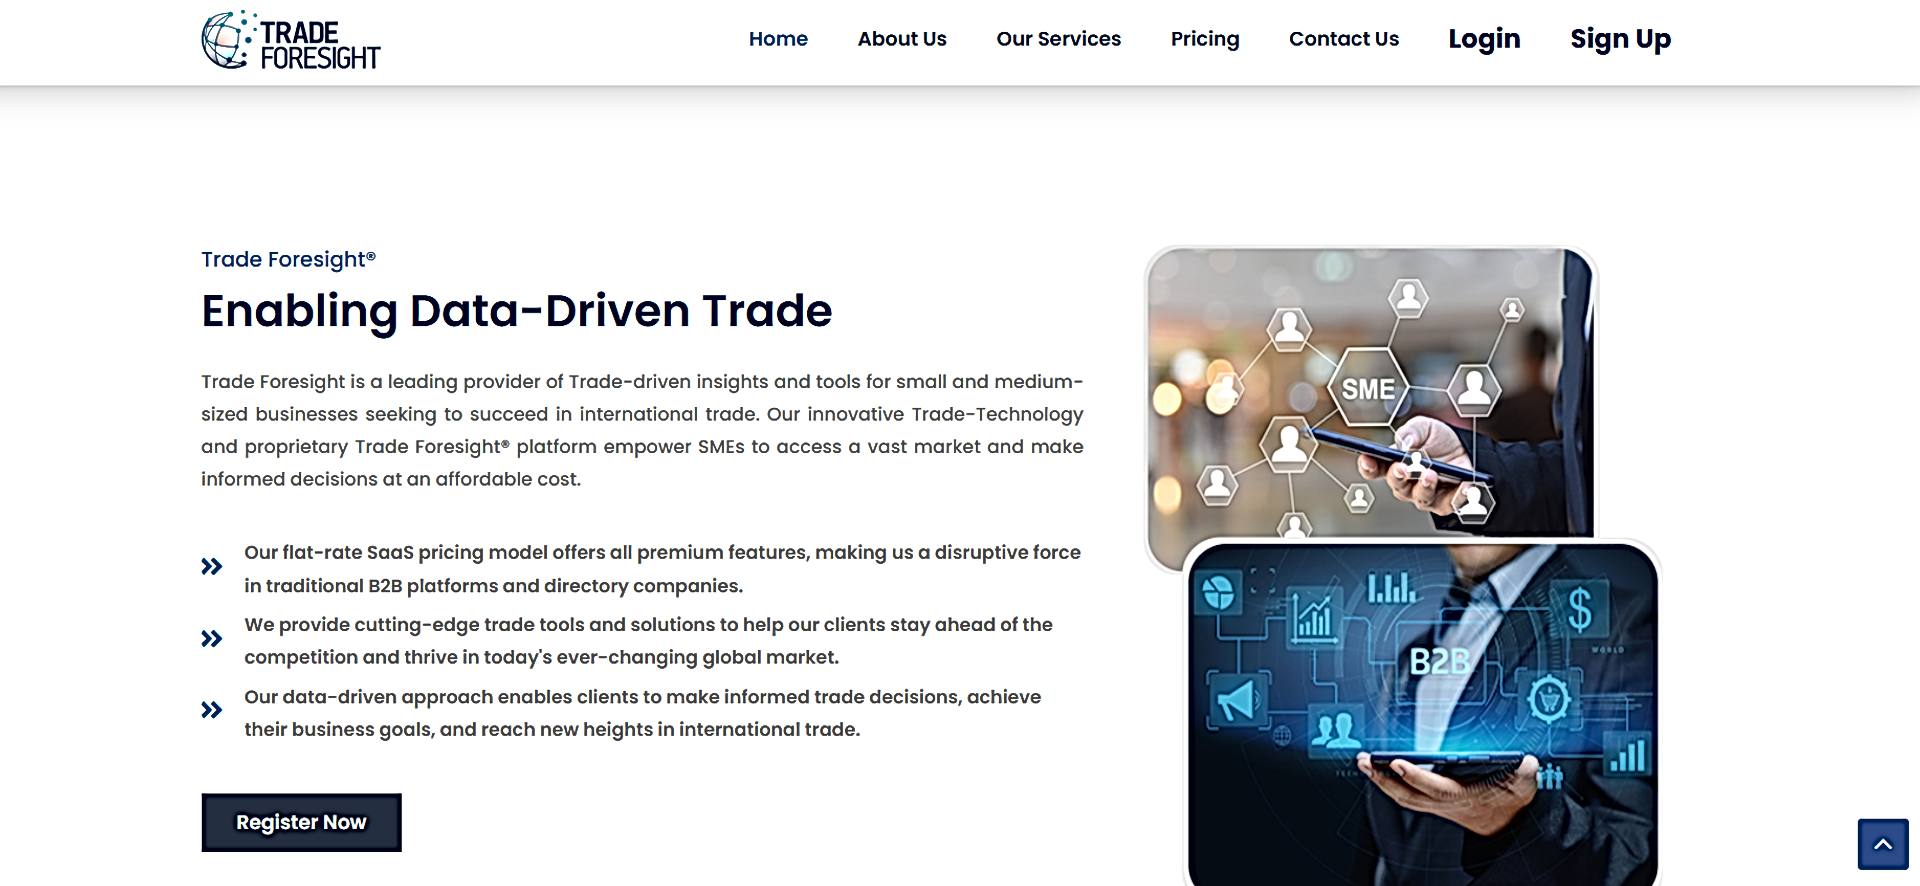 Trade Foresight featured